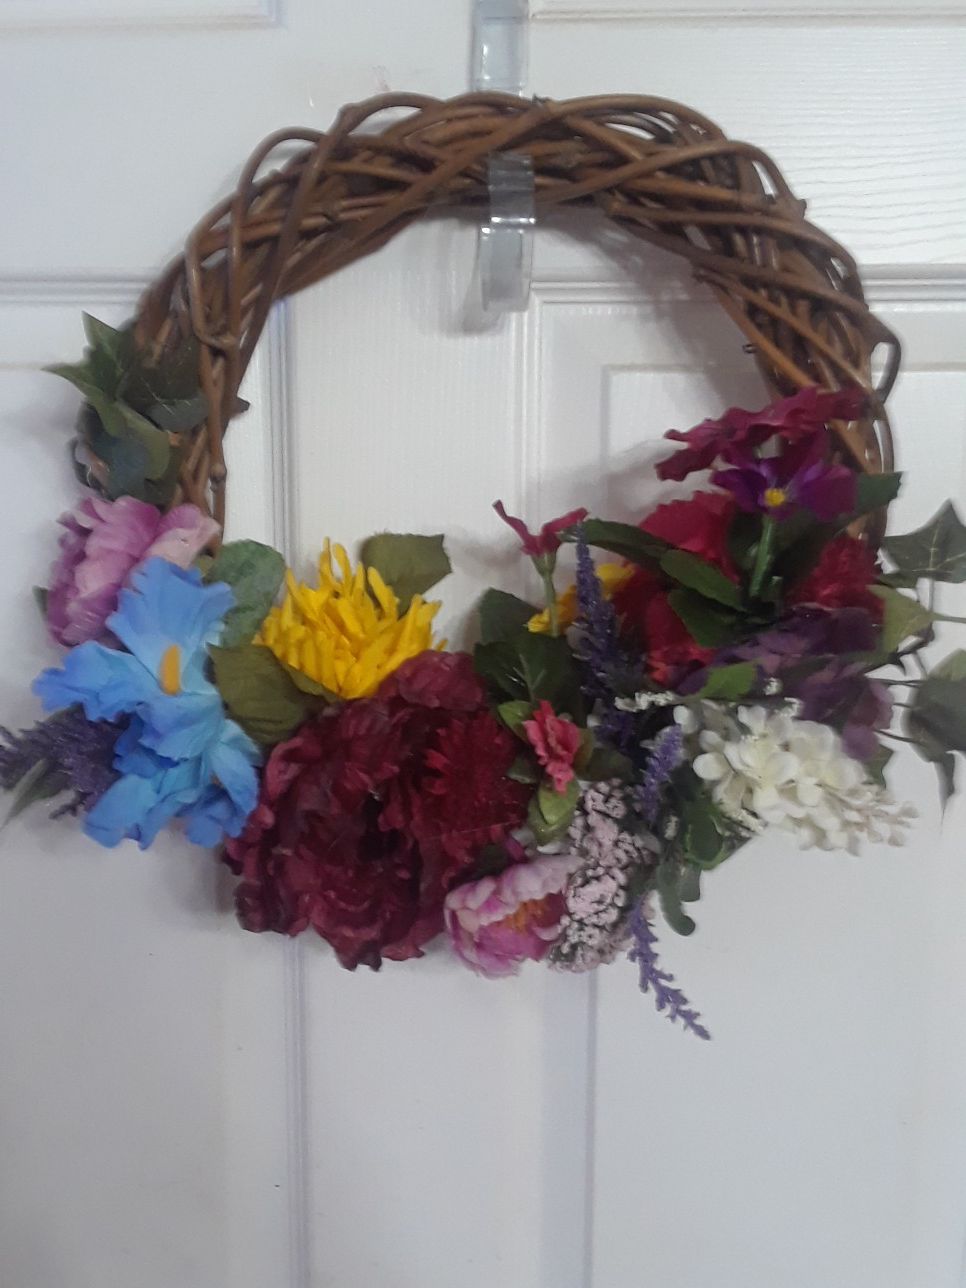 Large spring wreath $25.00 cash only ( serious buyers)